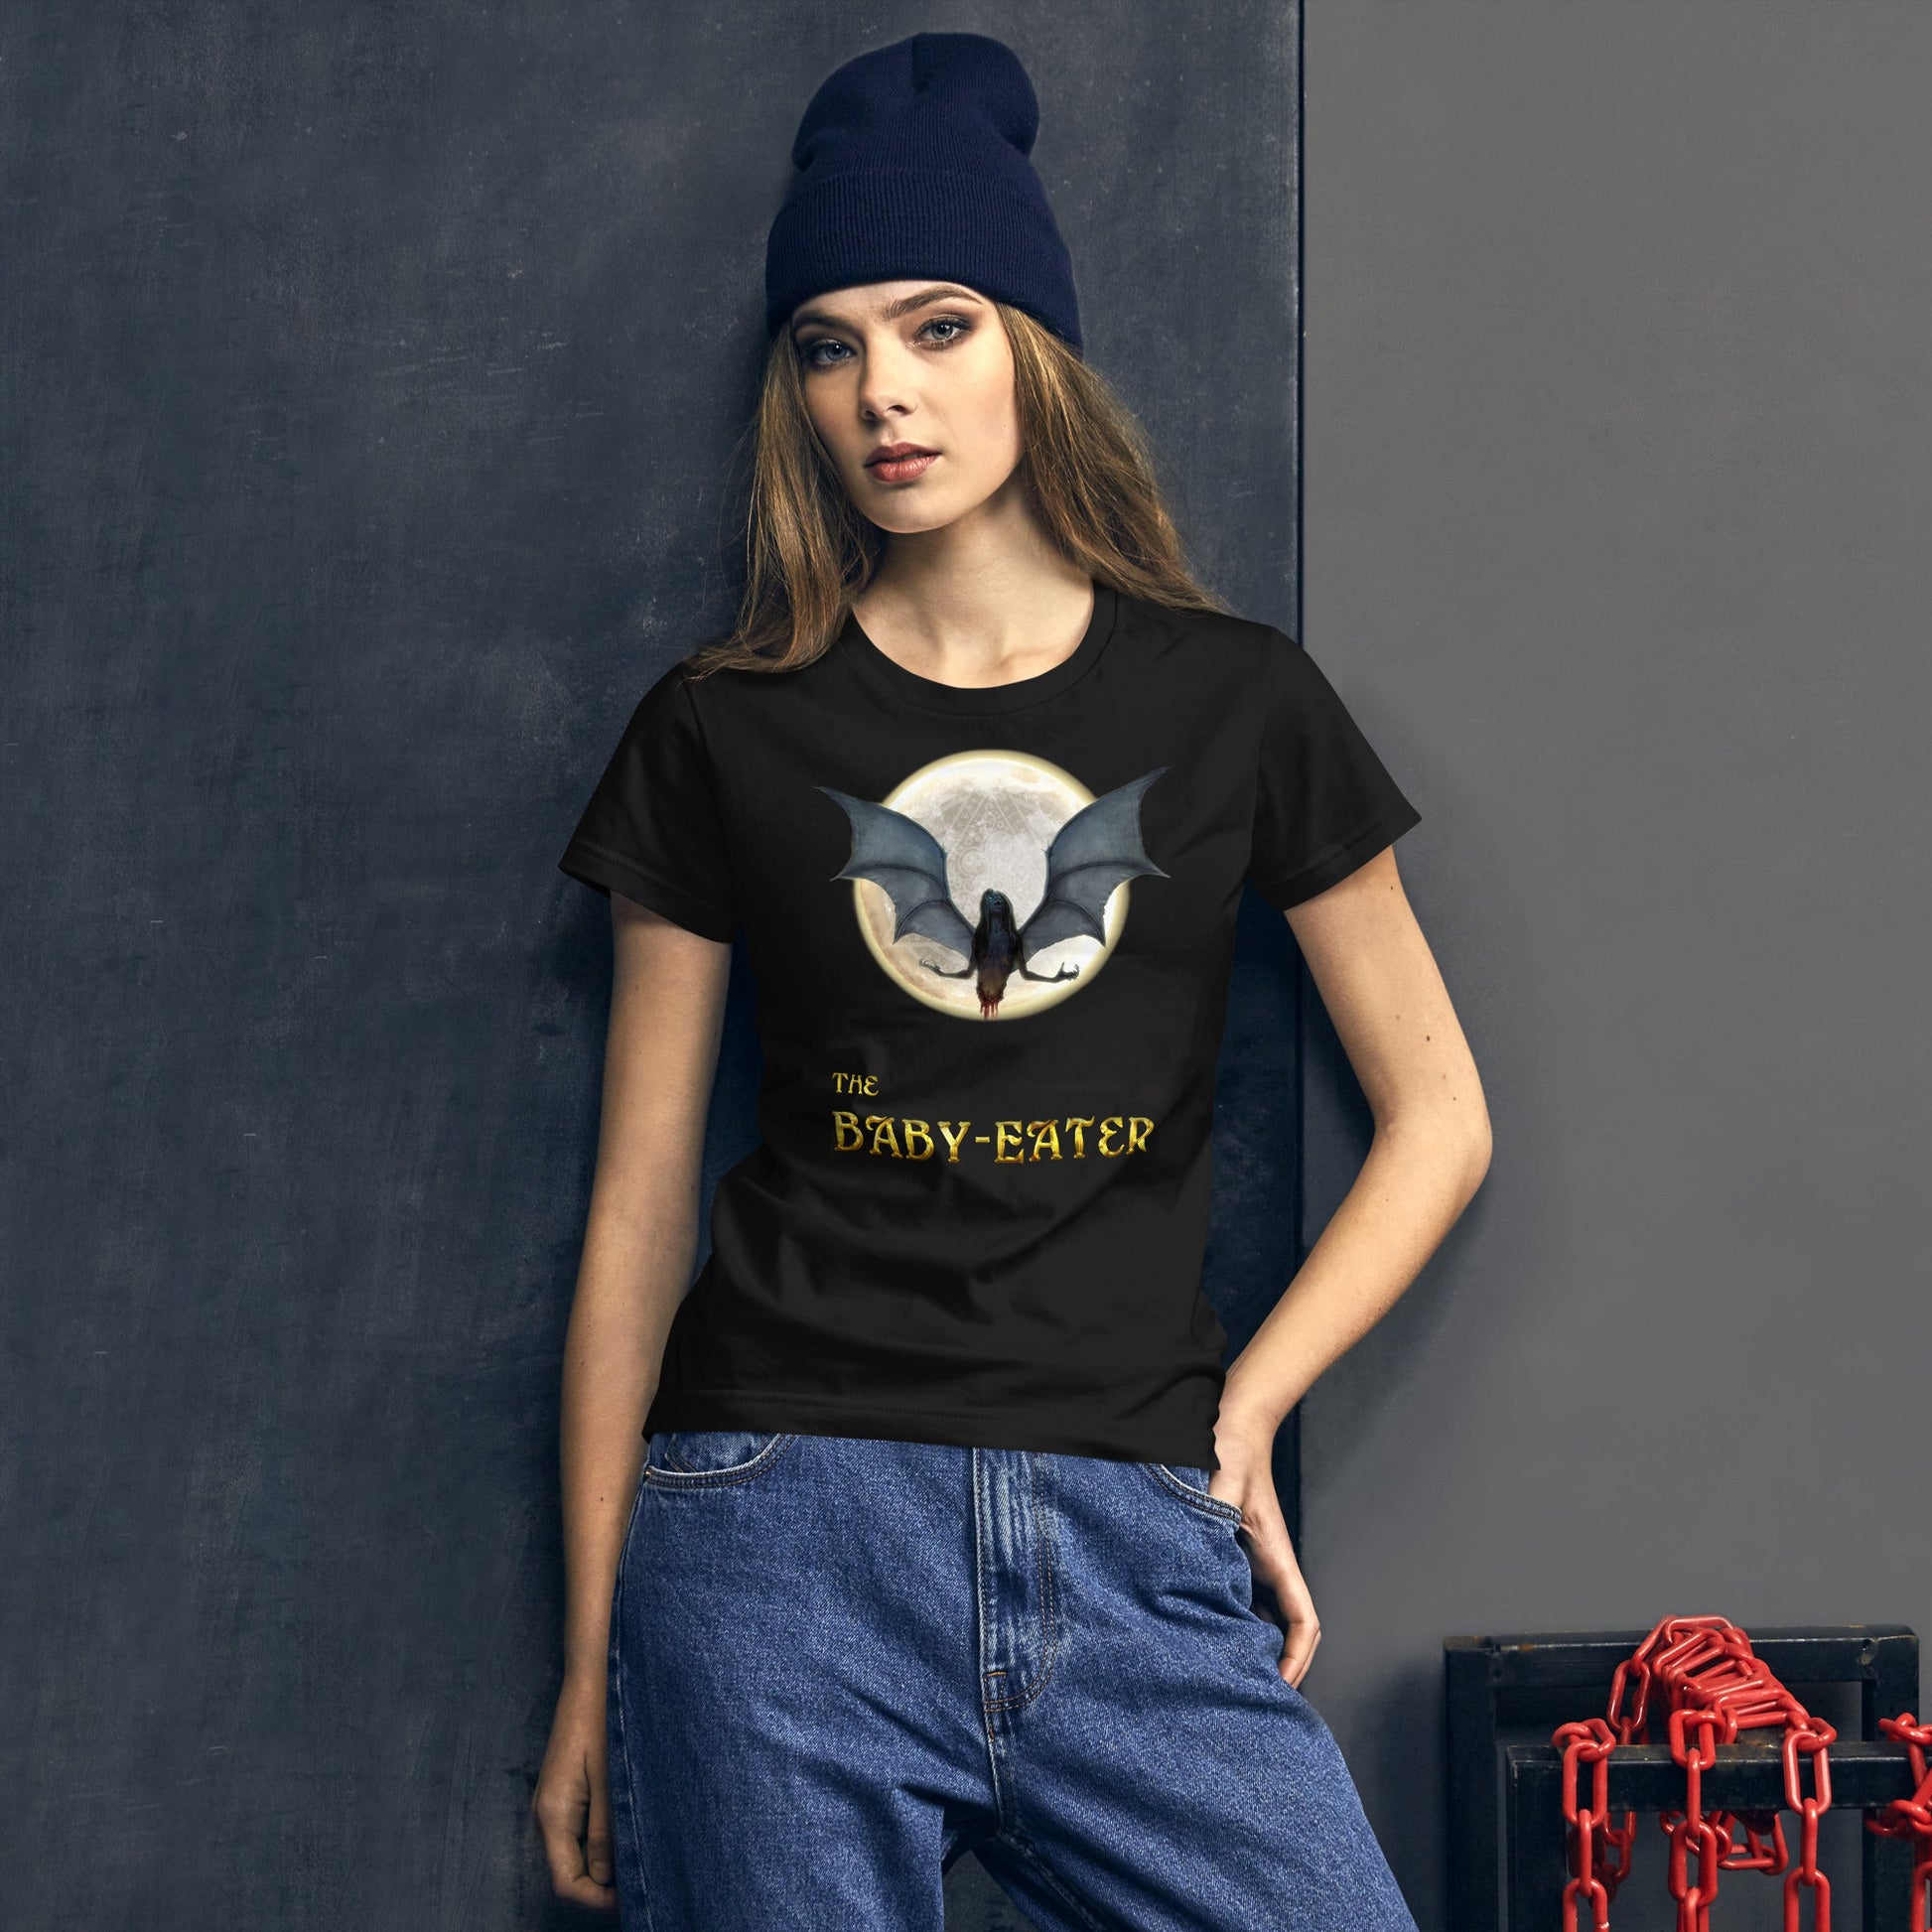 Women's Short-Sleeve Graphic T-Shirt | The Baby-Eater | Awards and Reviews - Spectral Ink Shop - Shirts & Tops -8953668_4902